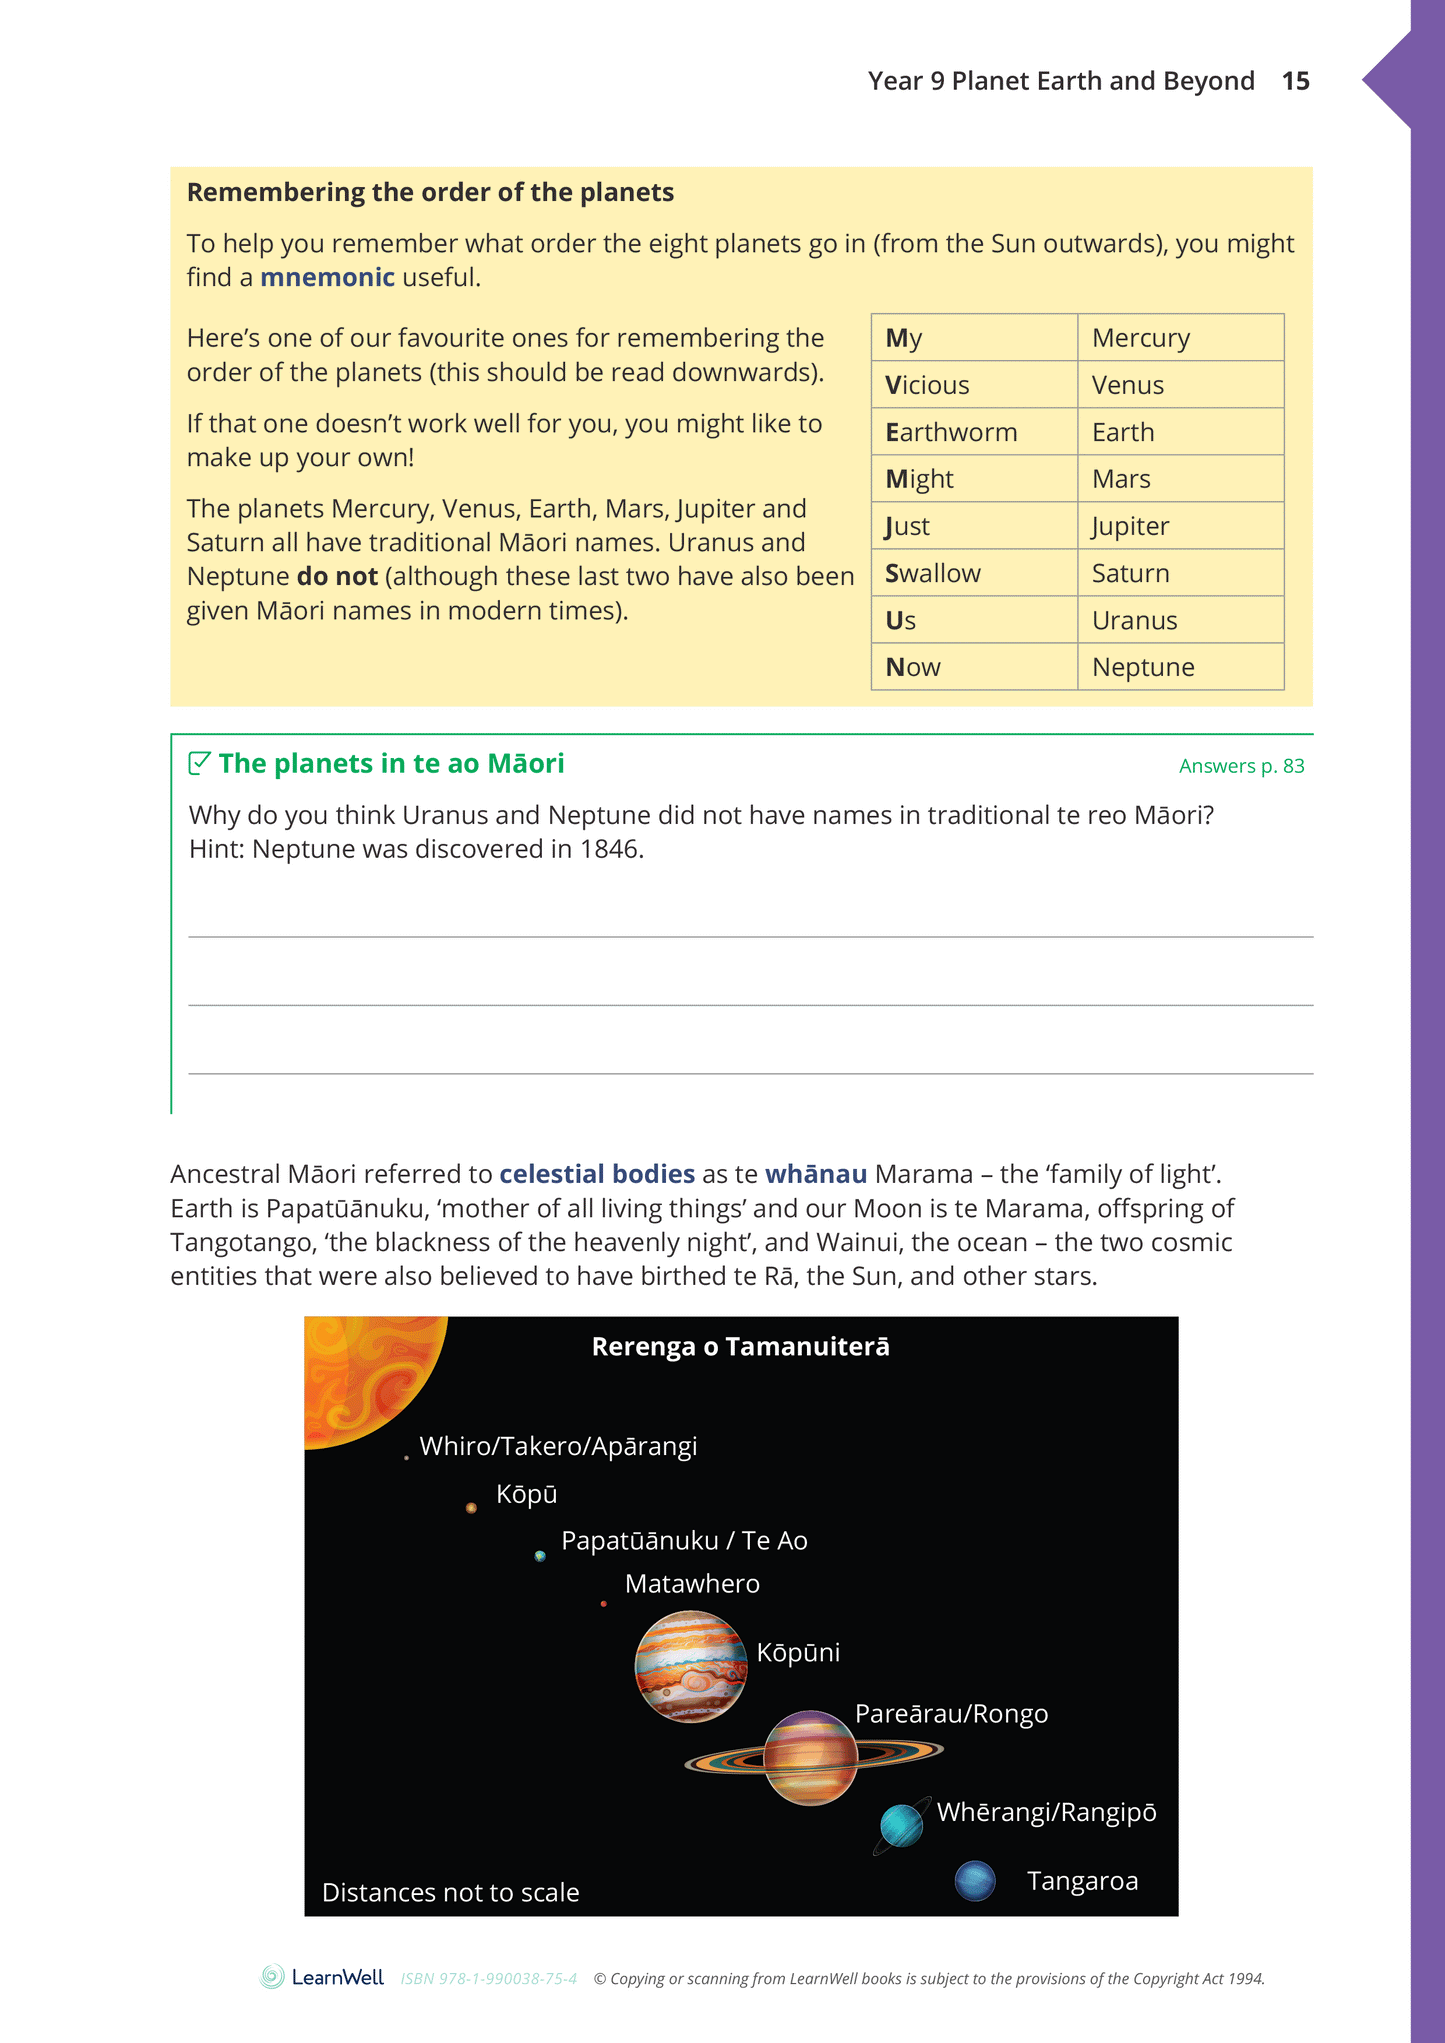 Year 9 Planet Earth and Beyond Learning Guide